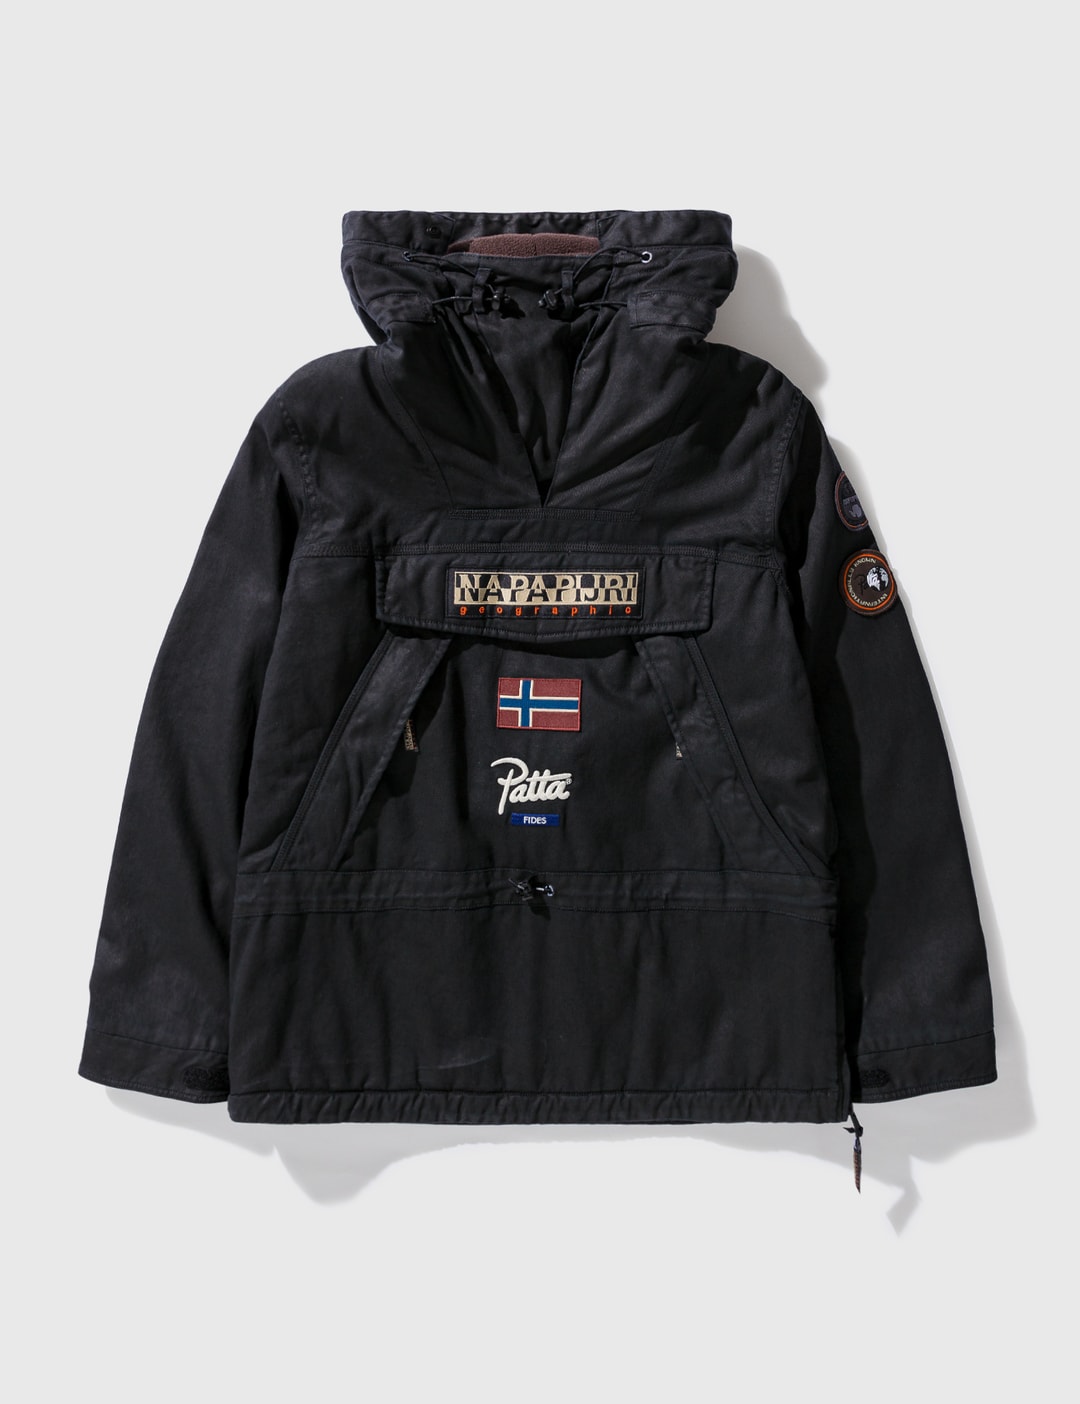 - Napapijri Patta Skidoo Jacket | HBX - Globally Curated Fashion and Lifestyle by